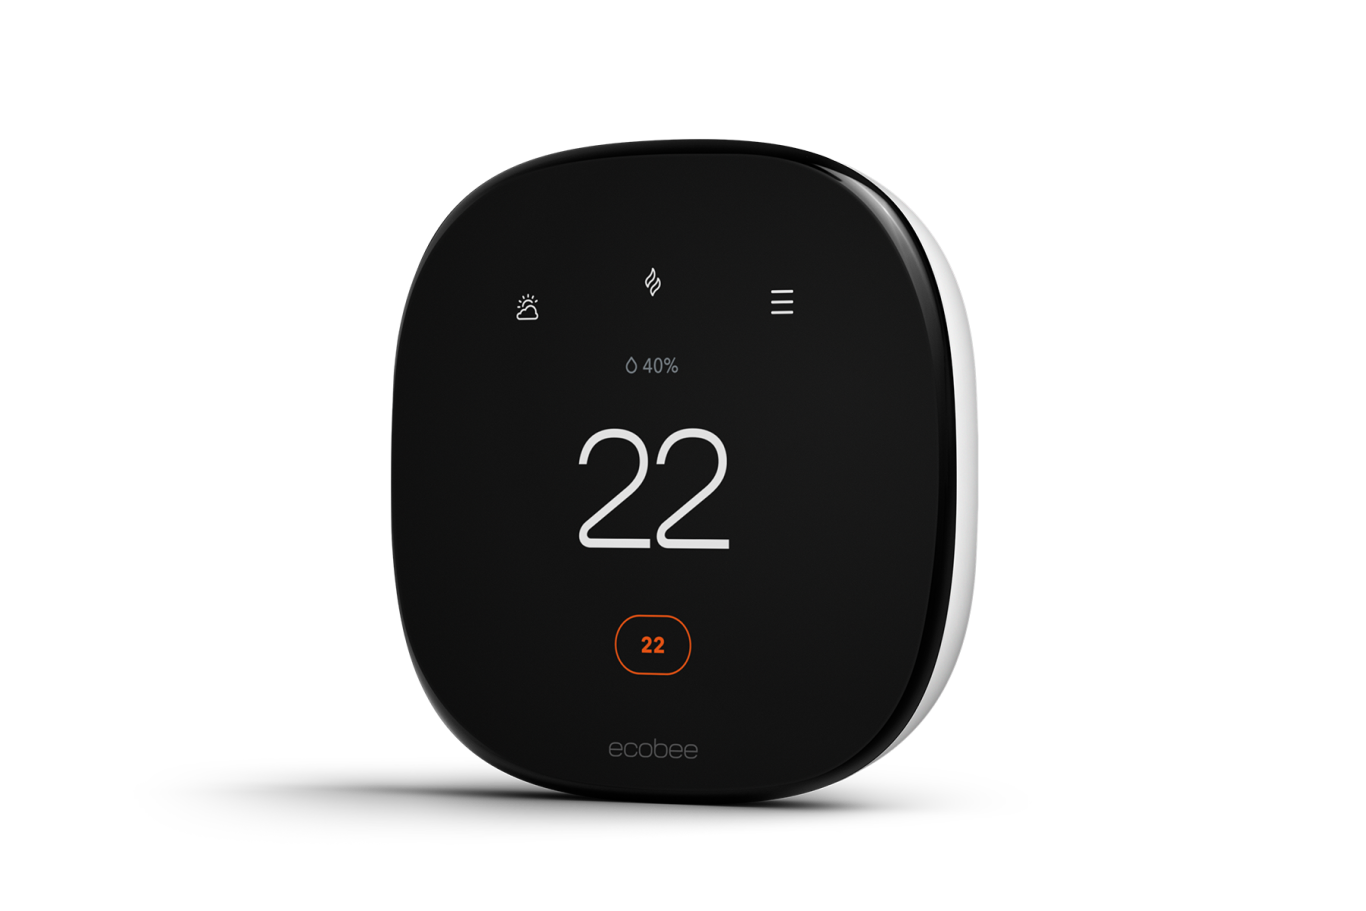 Three-quarter view of the ecobee smart thermostat enhanced